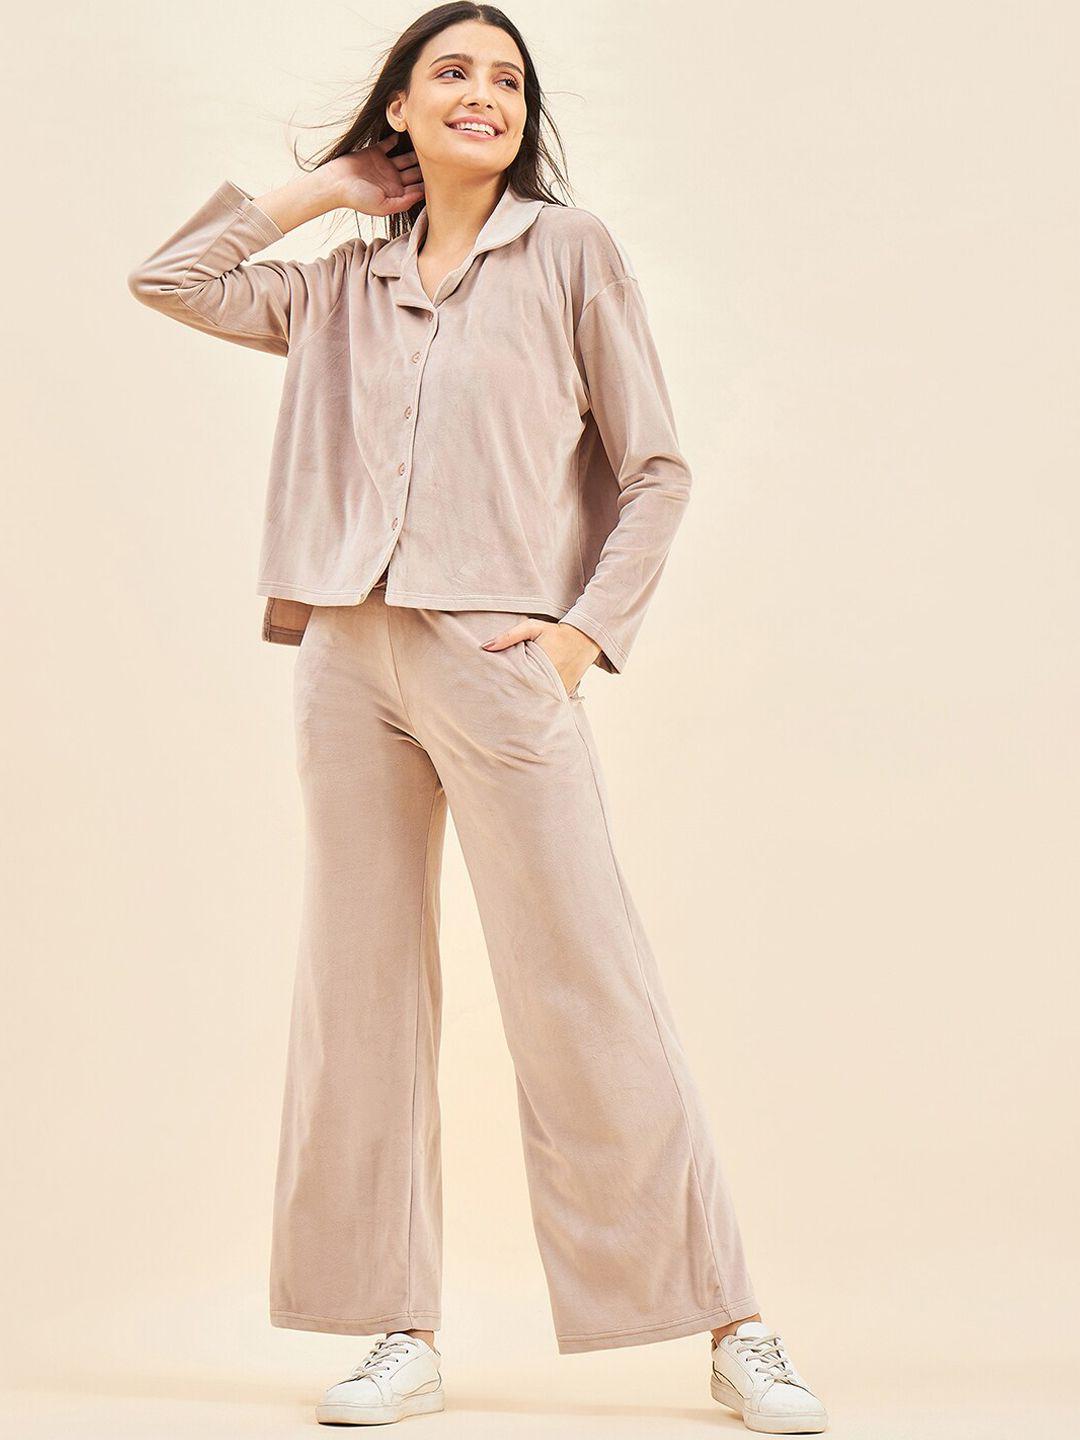 sweet dreams lapel collar shirt with trousers